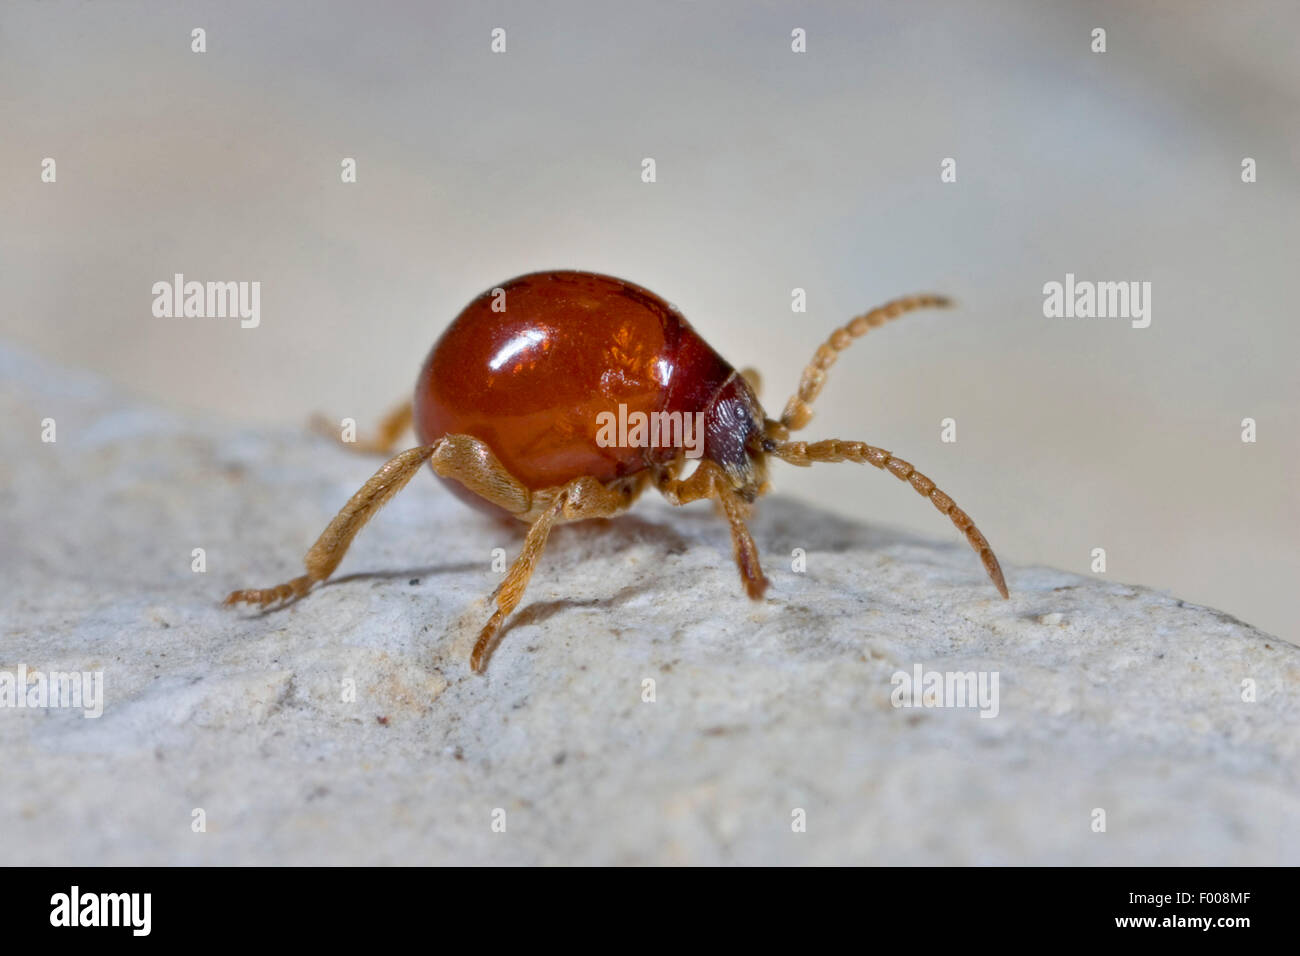 Smooth spider beetle, Hump beetle, Shiny spider beetle (Gibbium psylloides), on the ground, Germany Stock Photo